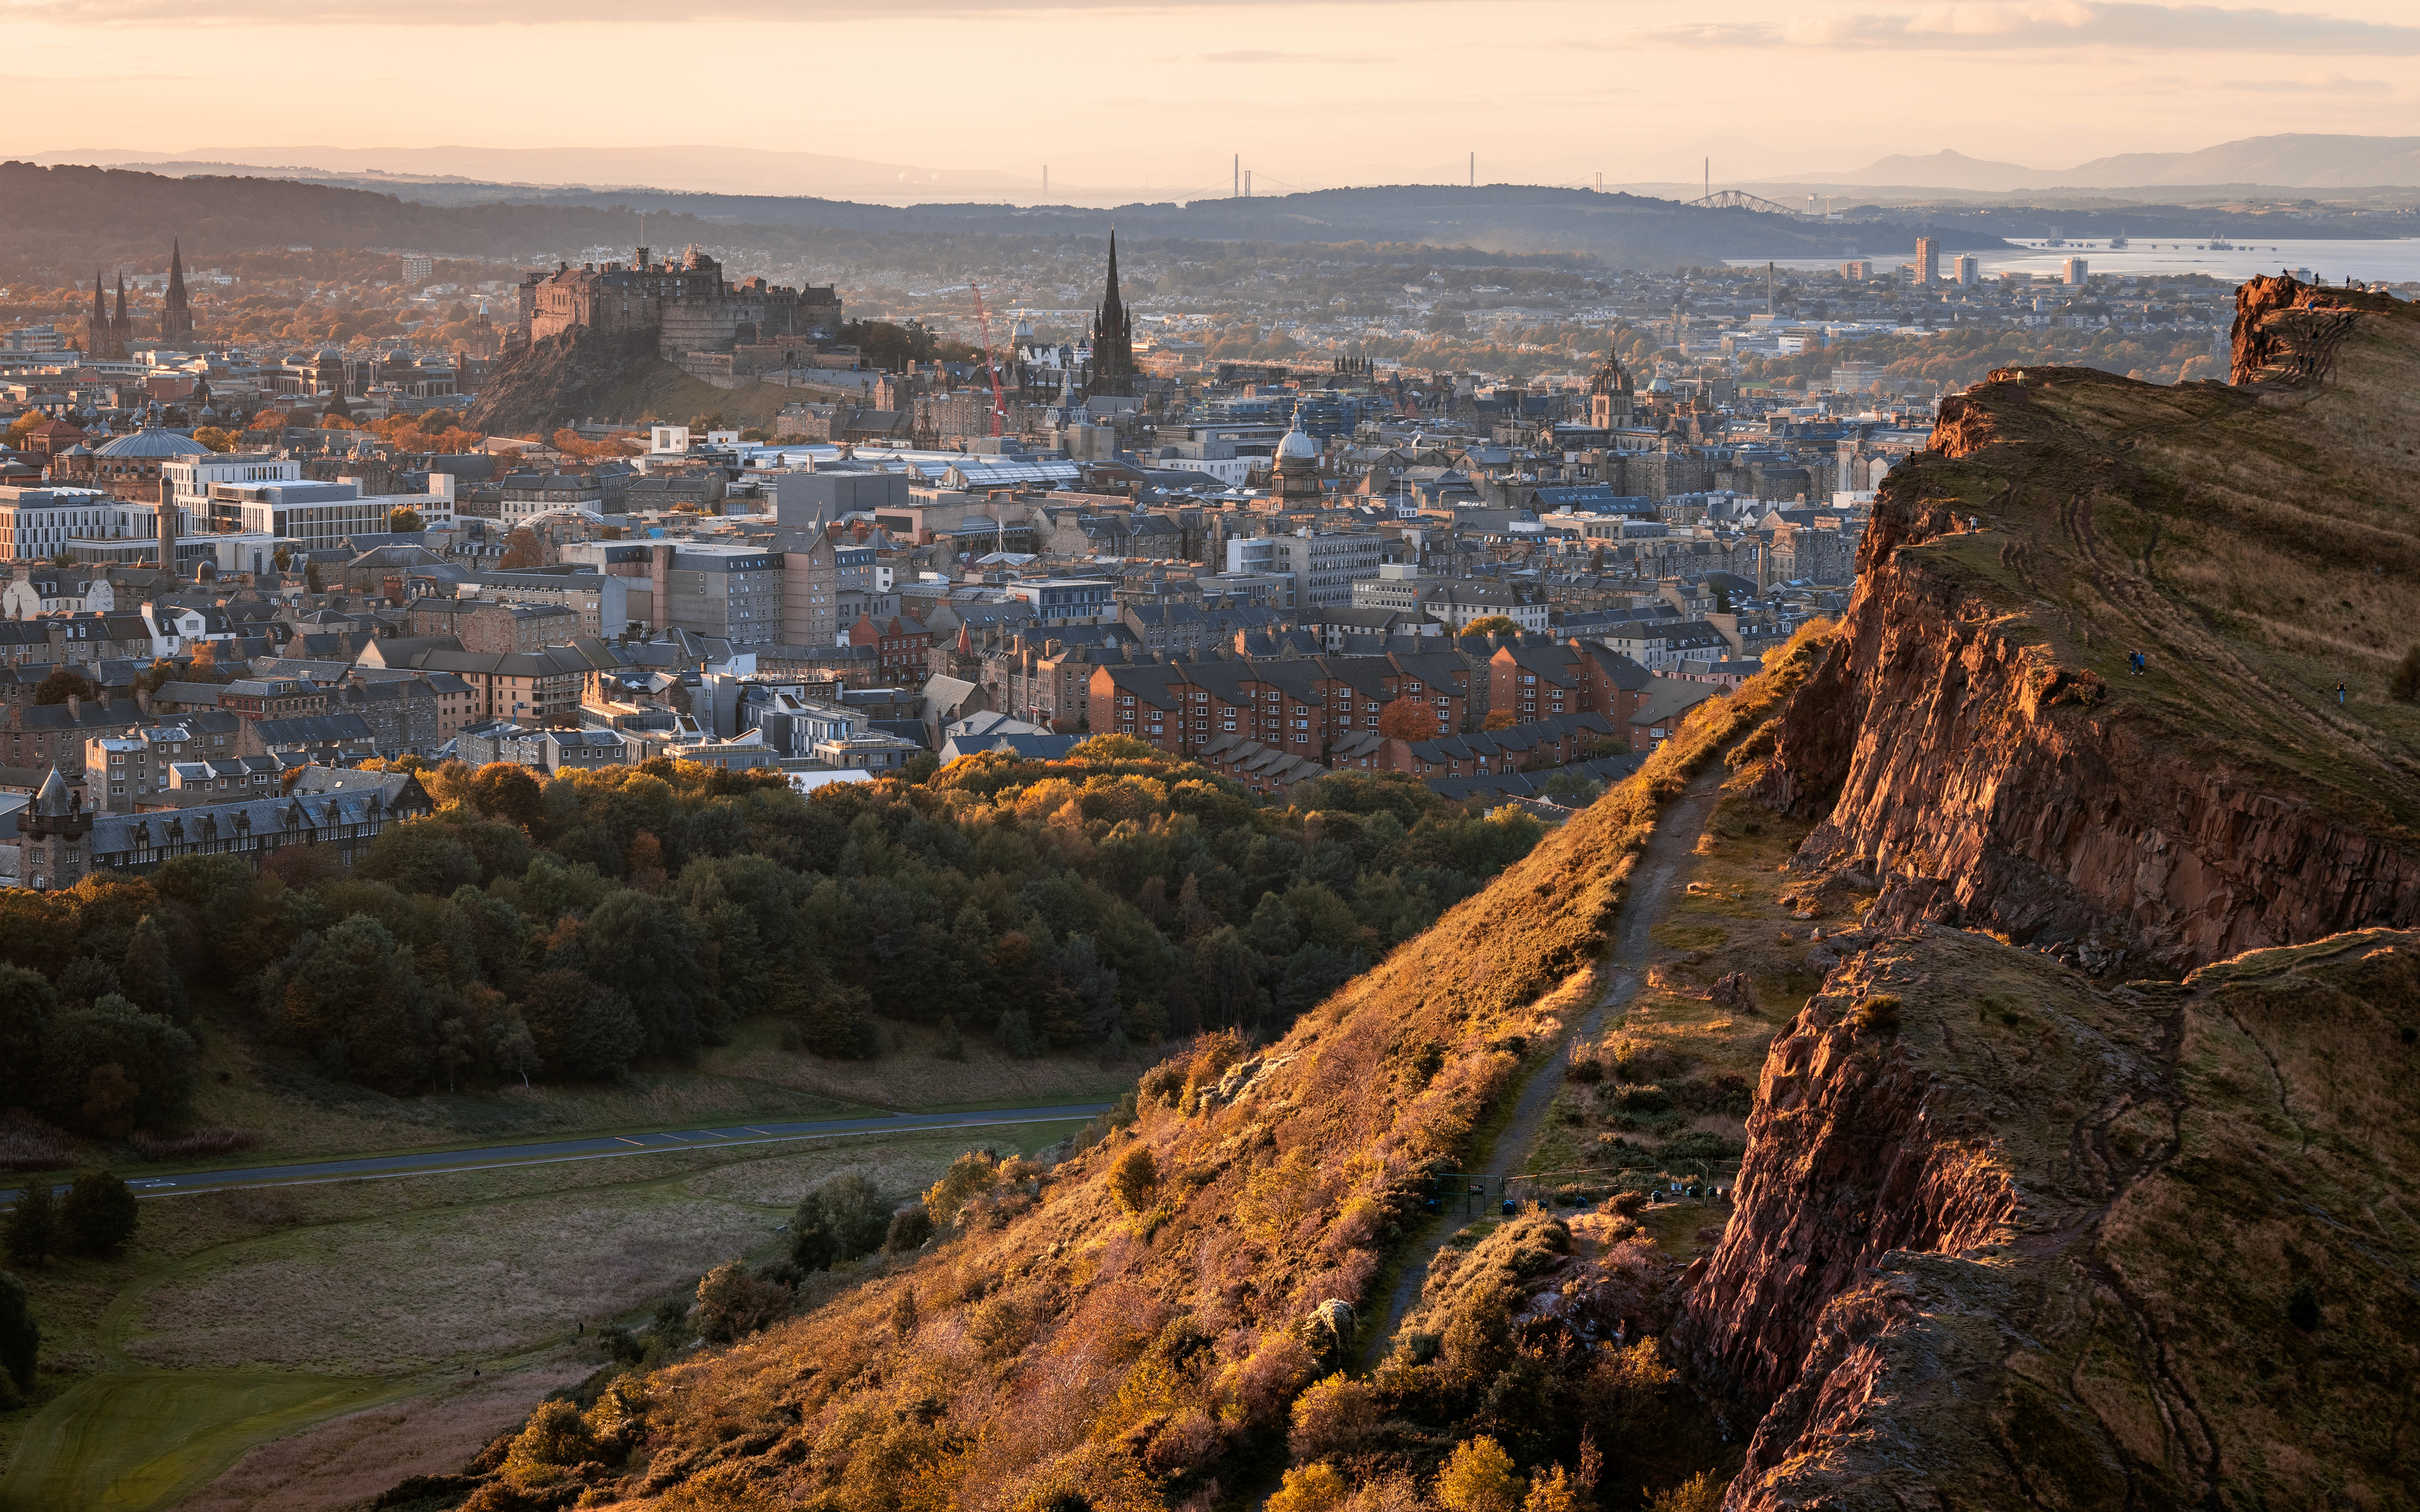 Looking at the Edinburgh skyline from a large mountain just outside the city